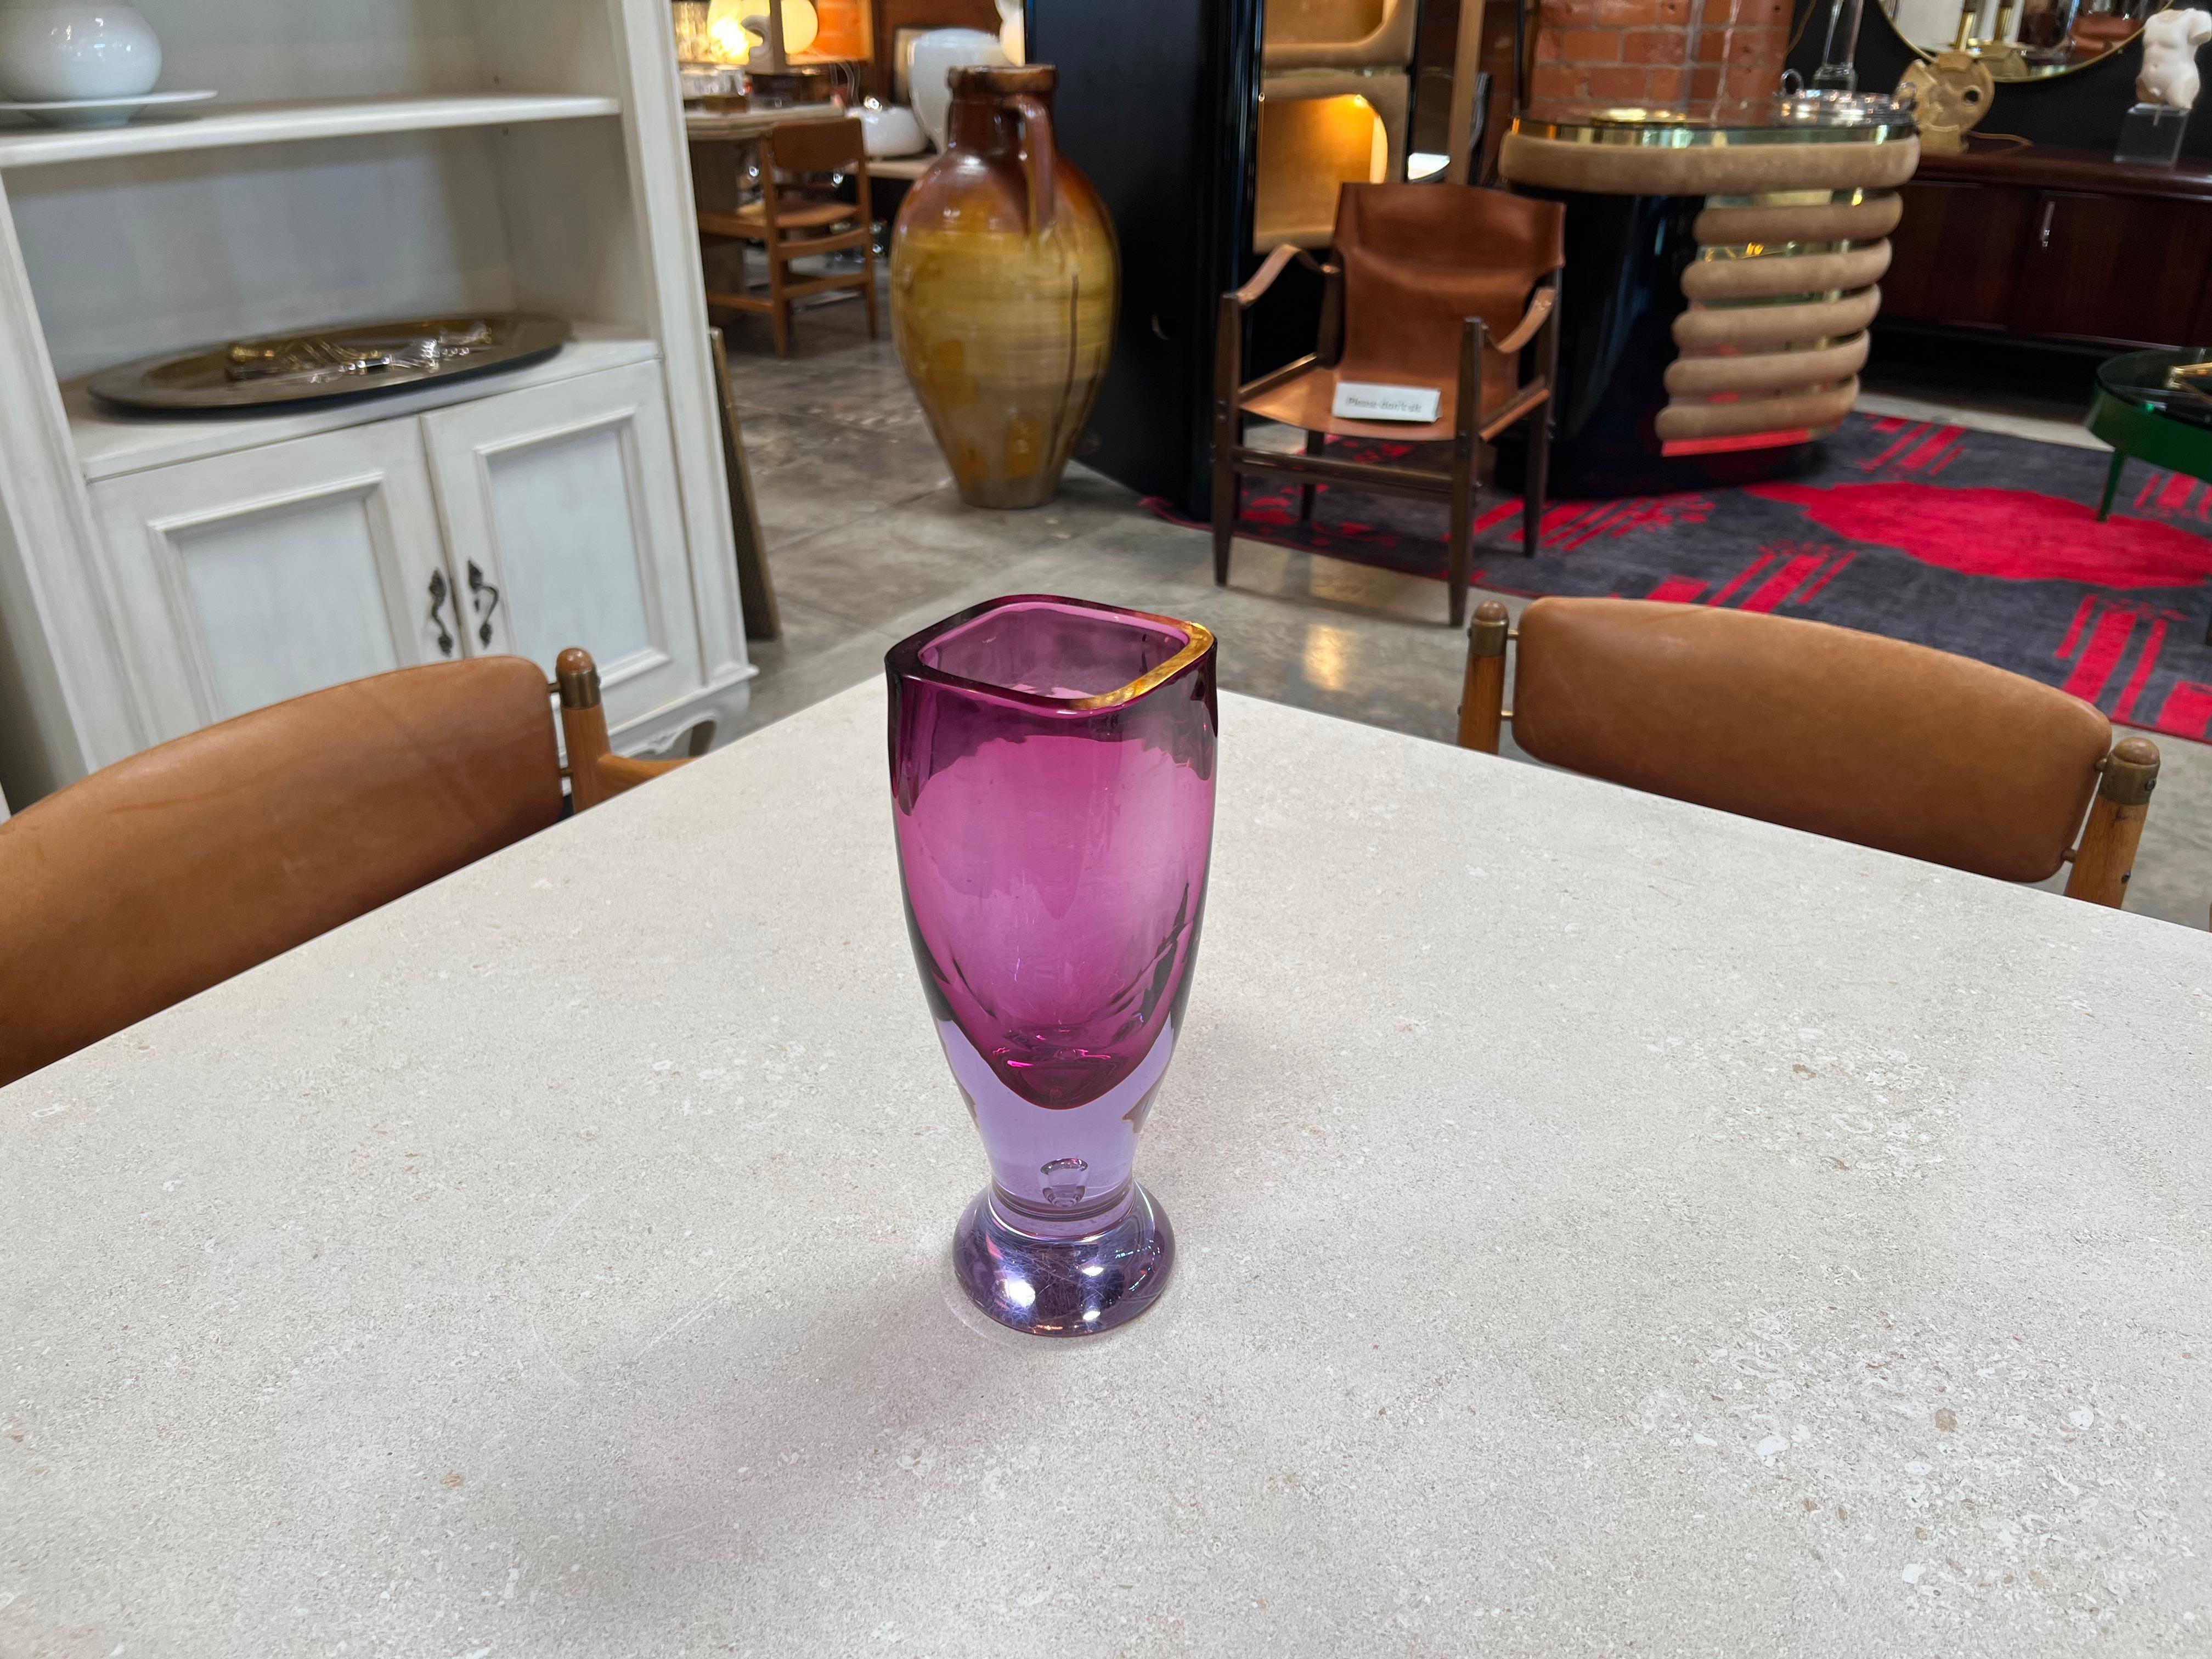 The Alessandro Mandruzzato Vintage Murano Vase from the 1970s is a highly sought-after piece of art glass. Crafted in a stunning shade of purple, this vase is characterized by its exceptional craftsmanship and distinctive design. The rarity of this